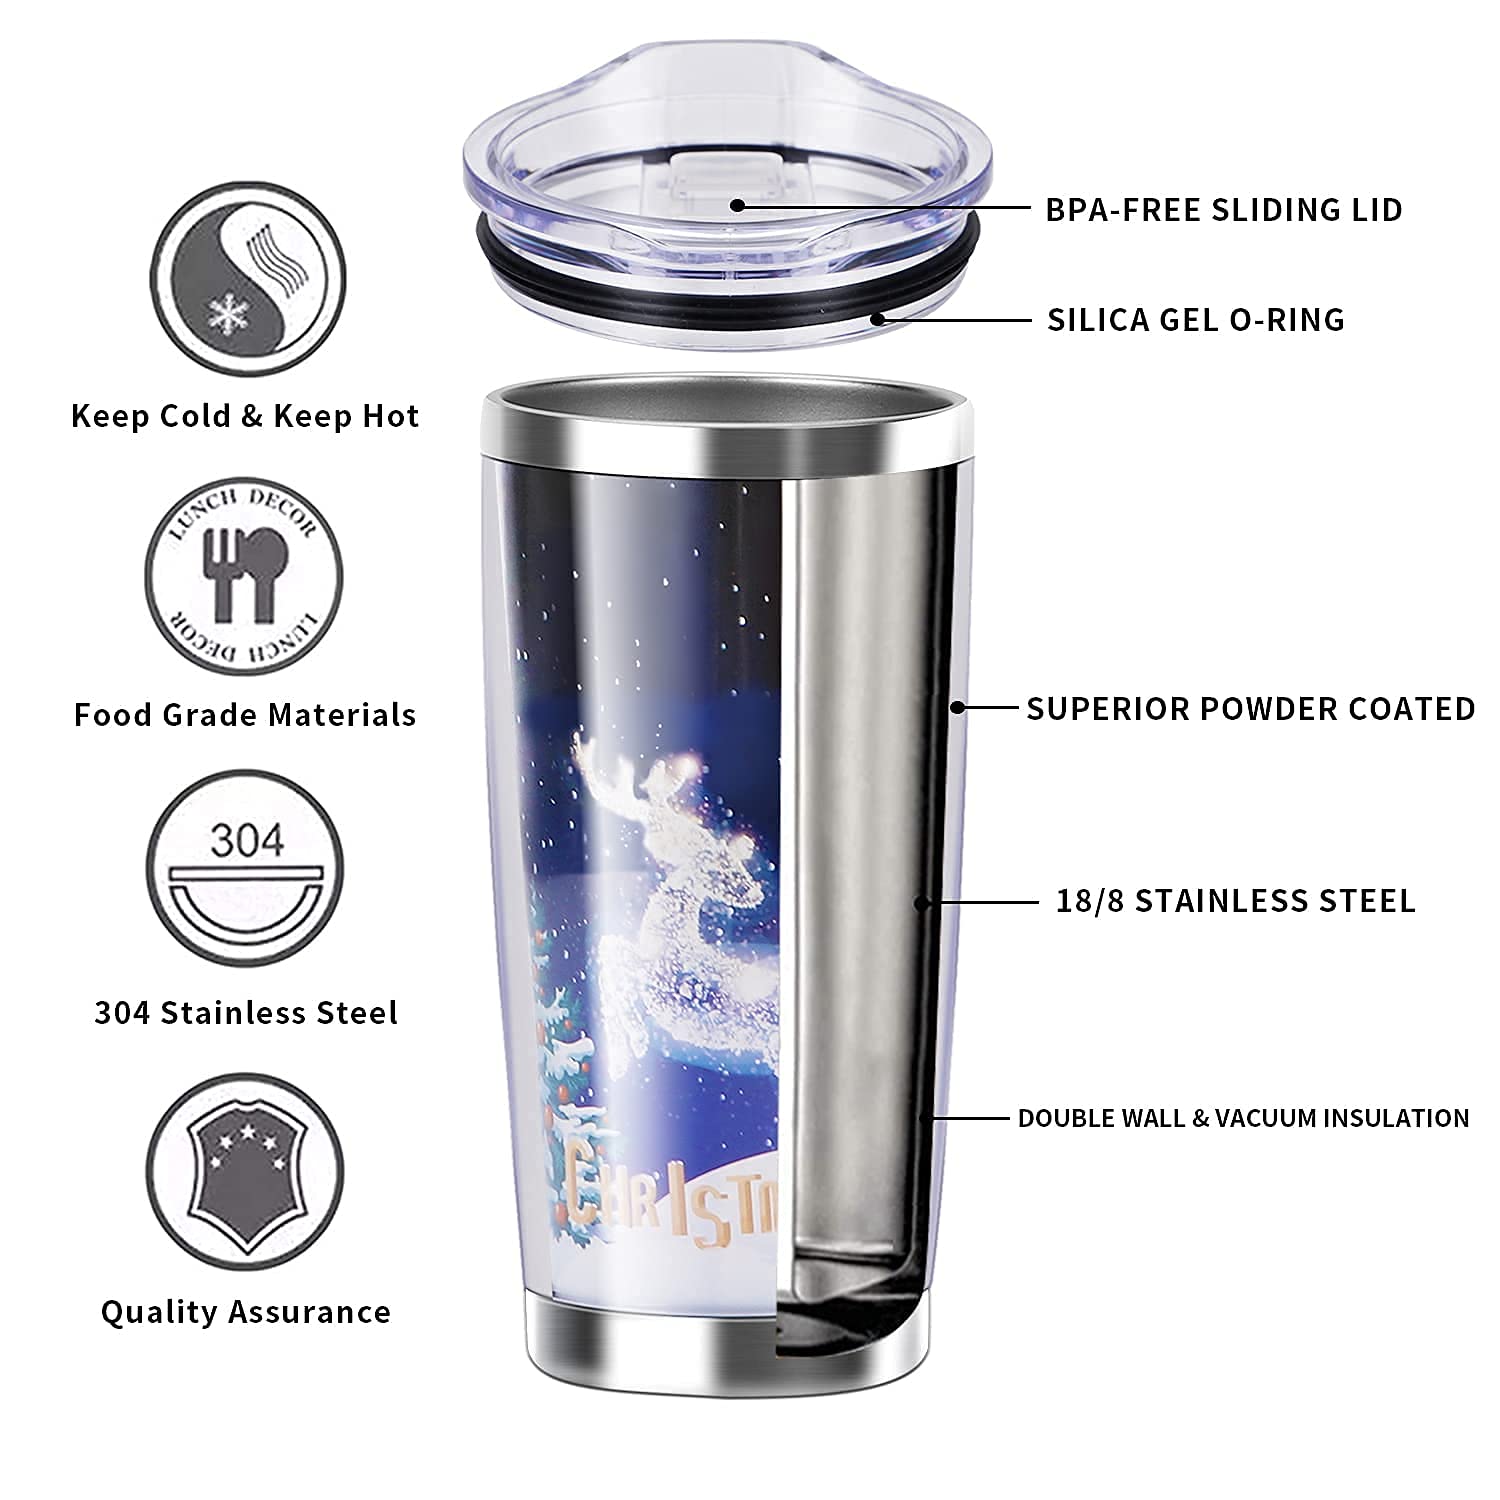 Olerd 20oz Photo Stainless Steel Tumbler, DIY Personalized Cups, 600ML Double Wall DIY Photo Coffee Mug with Lid for Ice & Hot Drink, Halloween Christmas Gifts for Men and Women